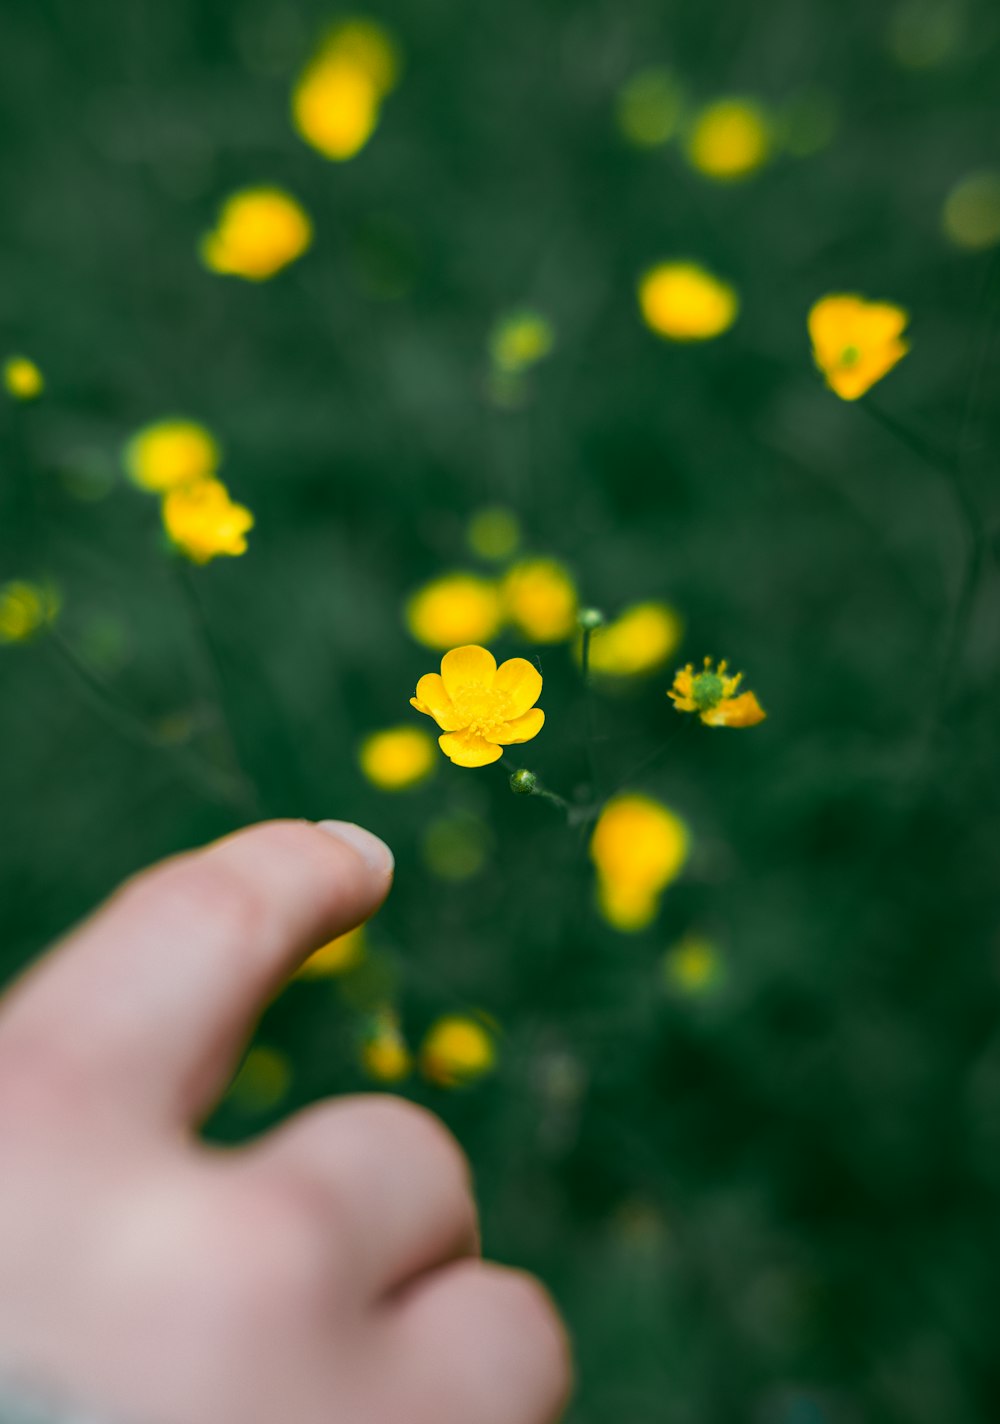 a hand reaching for a yellow flower in a field